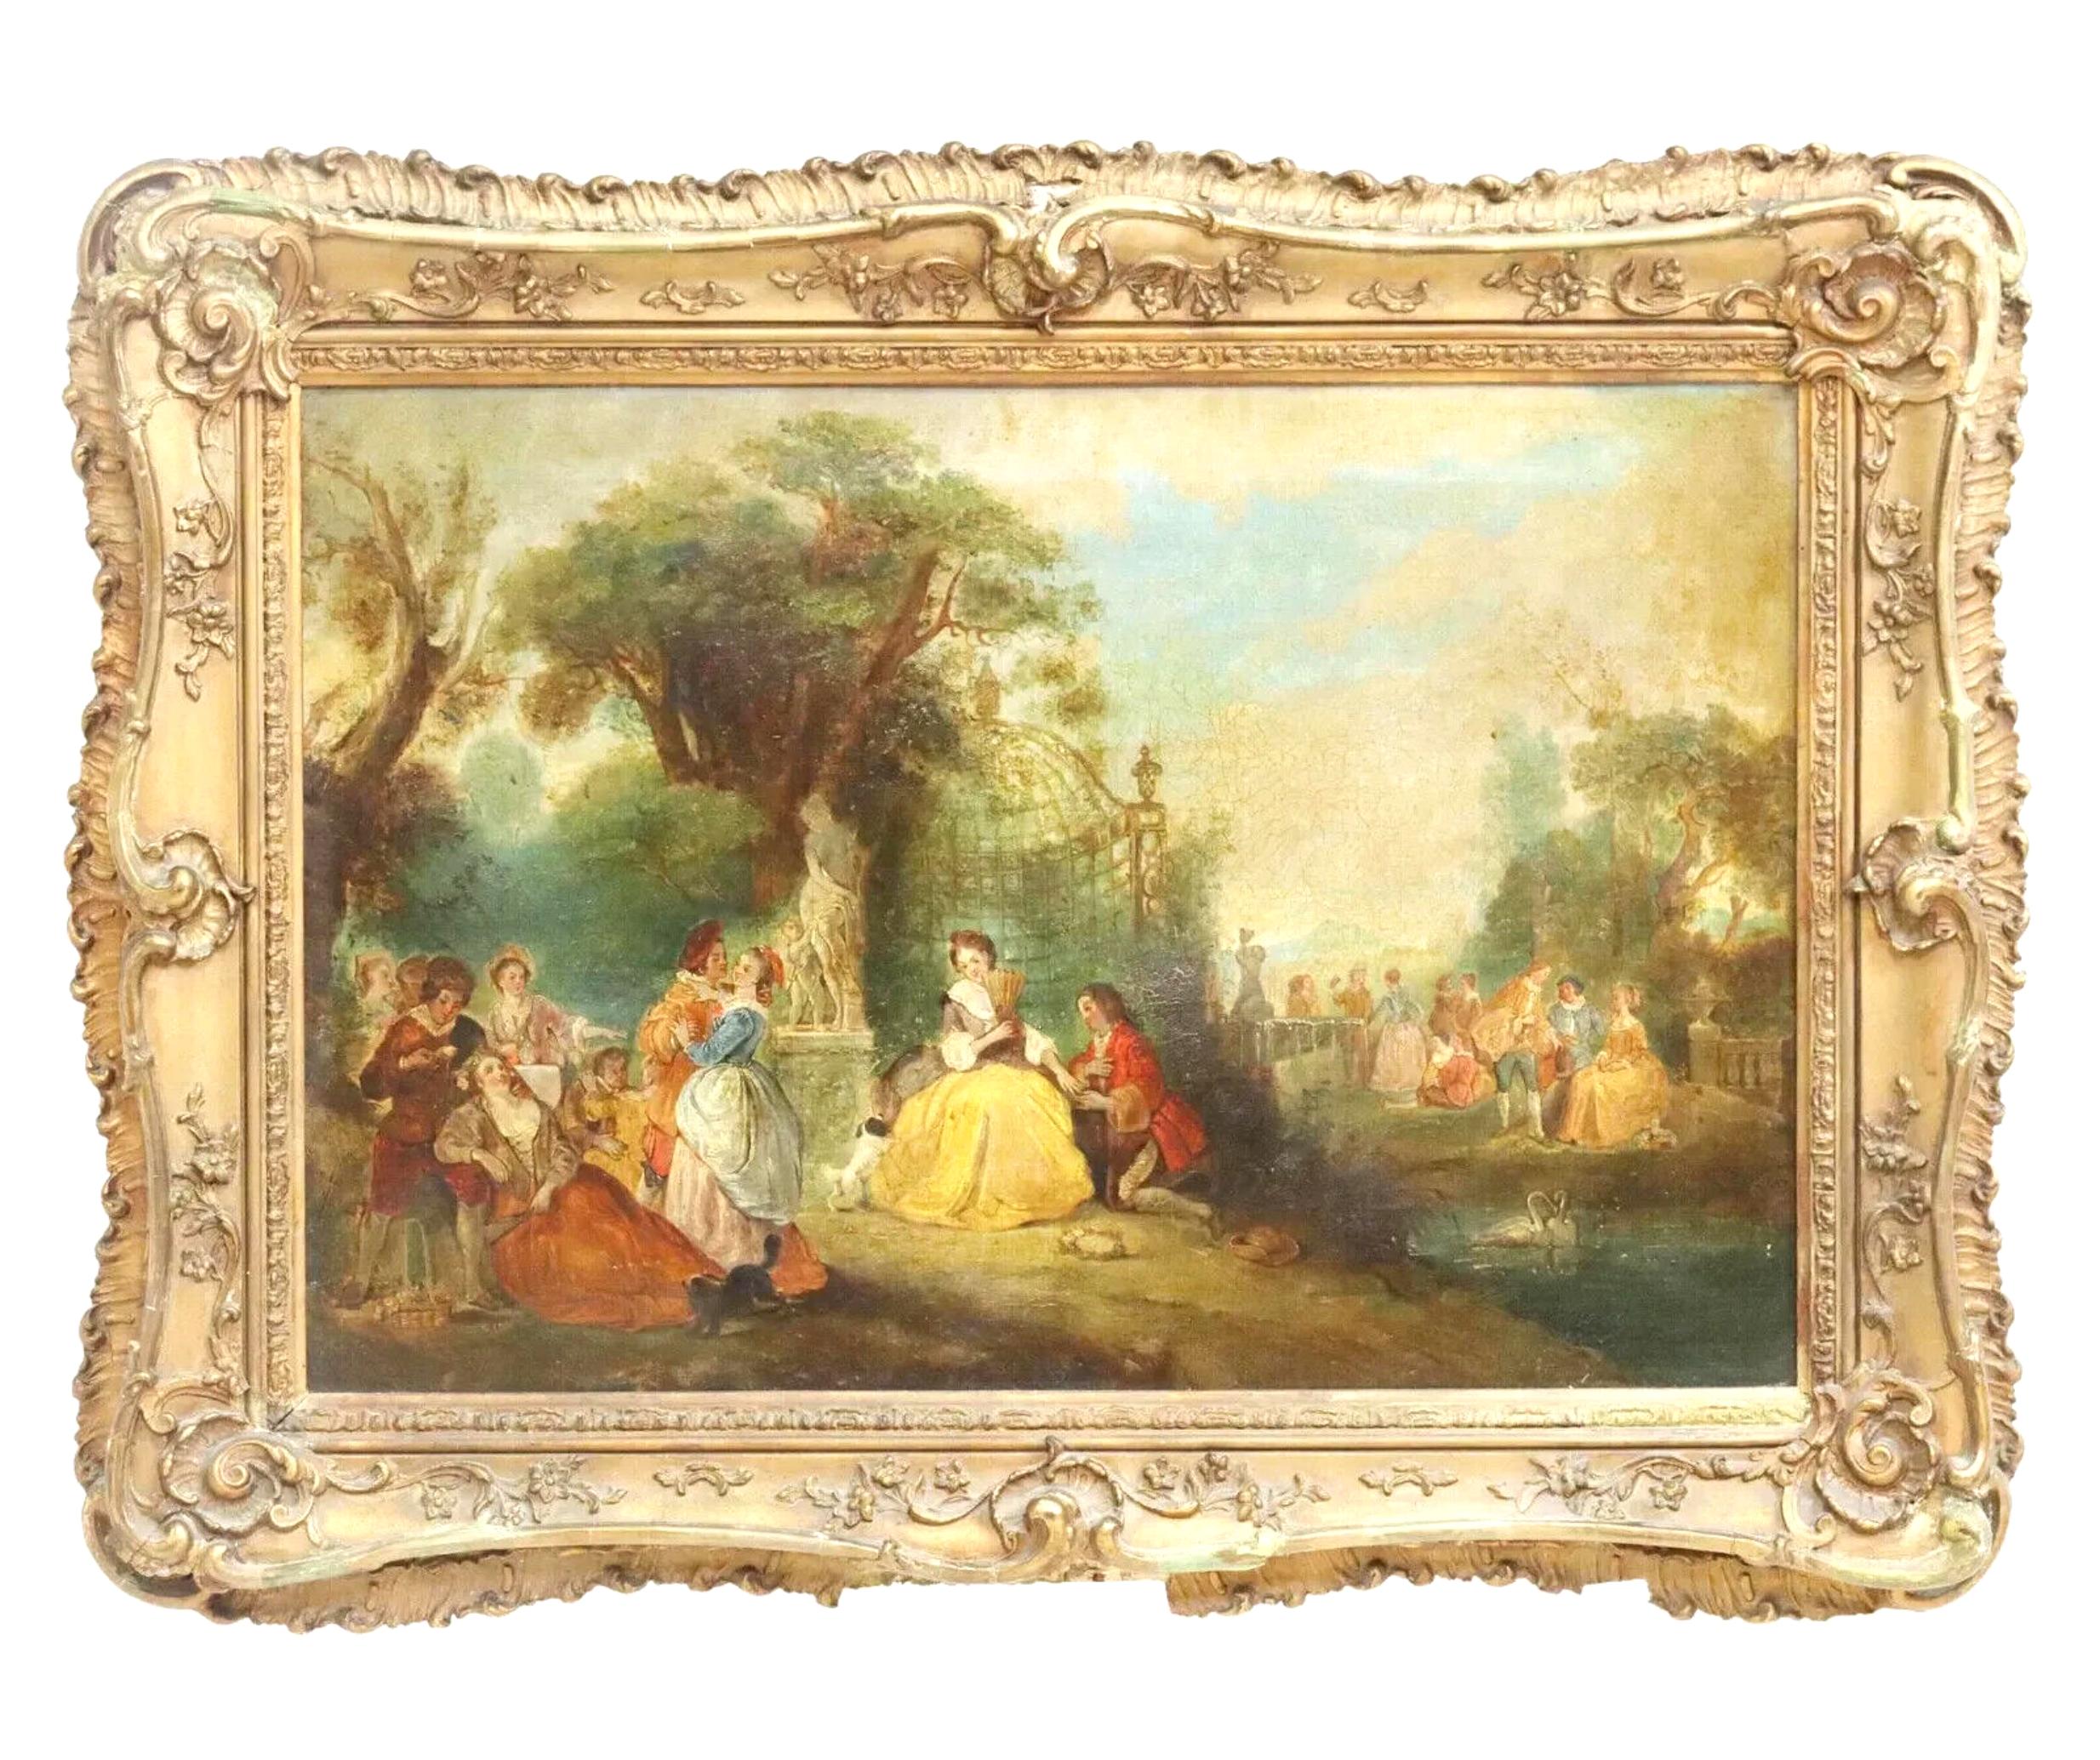 Gorgeous Antique Painting, Oil, French School, Fete Champetre, Gold Frame,  18th C, 1700s with Beautiful Colors!!

Framed oil on canvas painting, Fete Champetre, follower of Jean-Baptiste Pater (French, 1695-1736), sight: approx 22.5